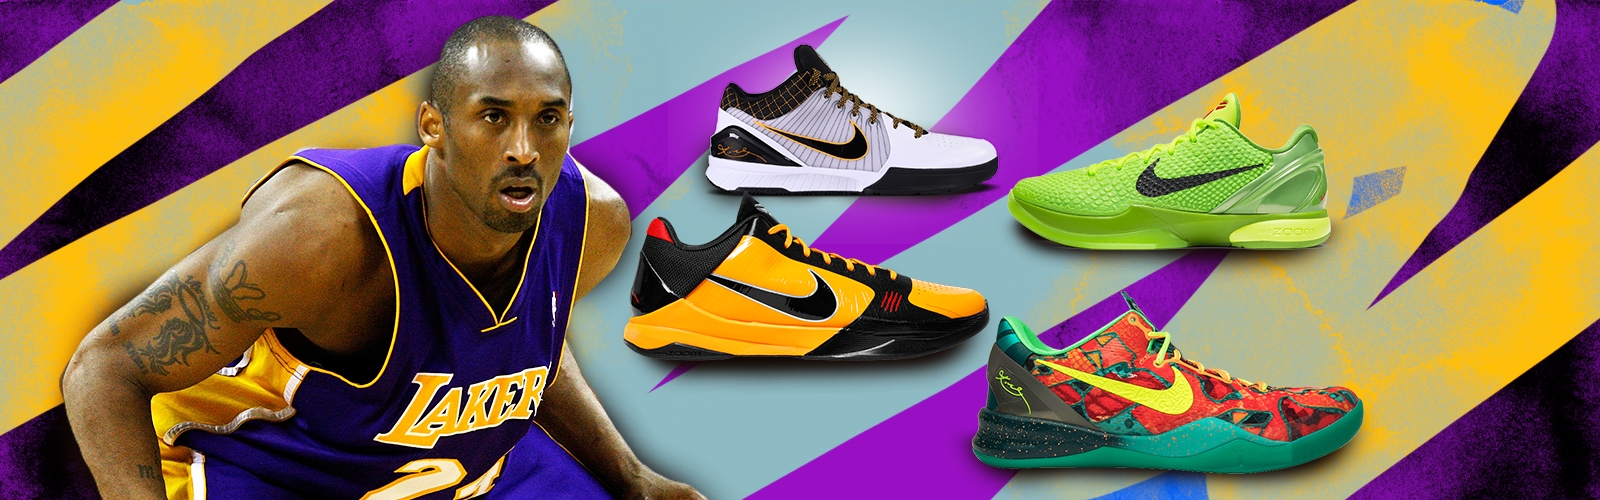 The Best Nike Basketball Shoes for Guards. Nike.com